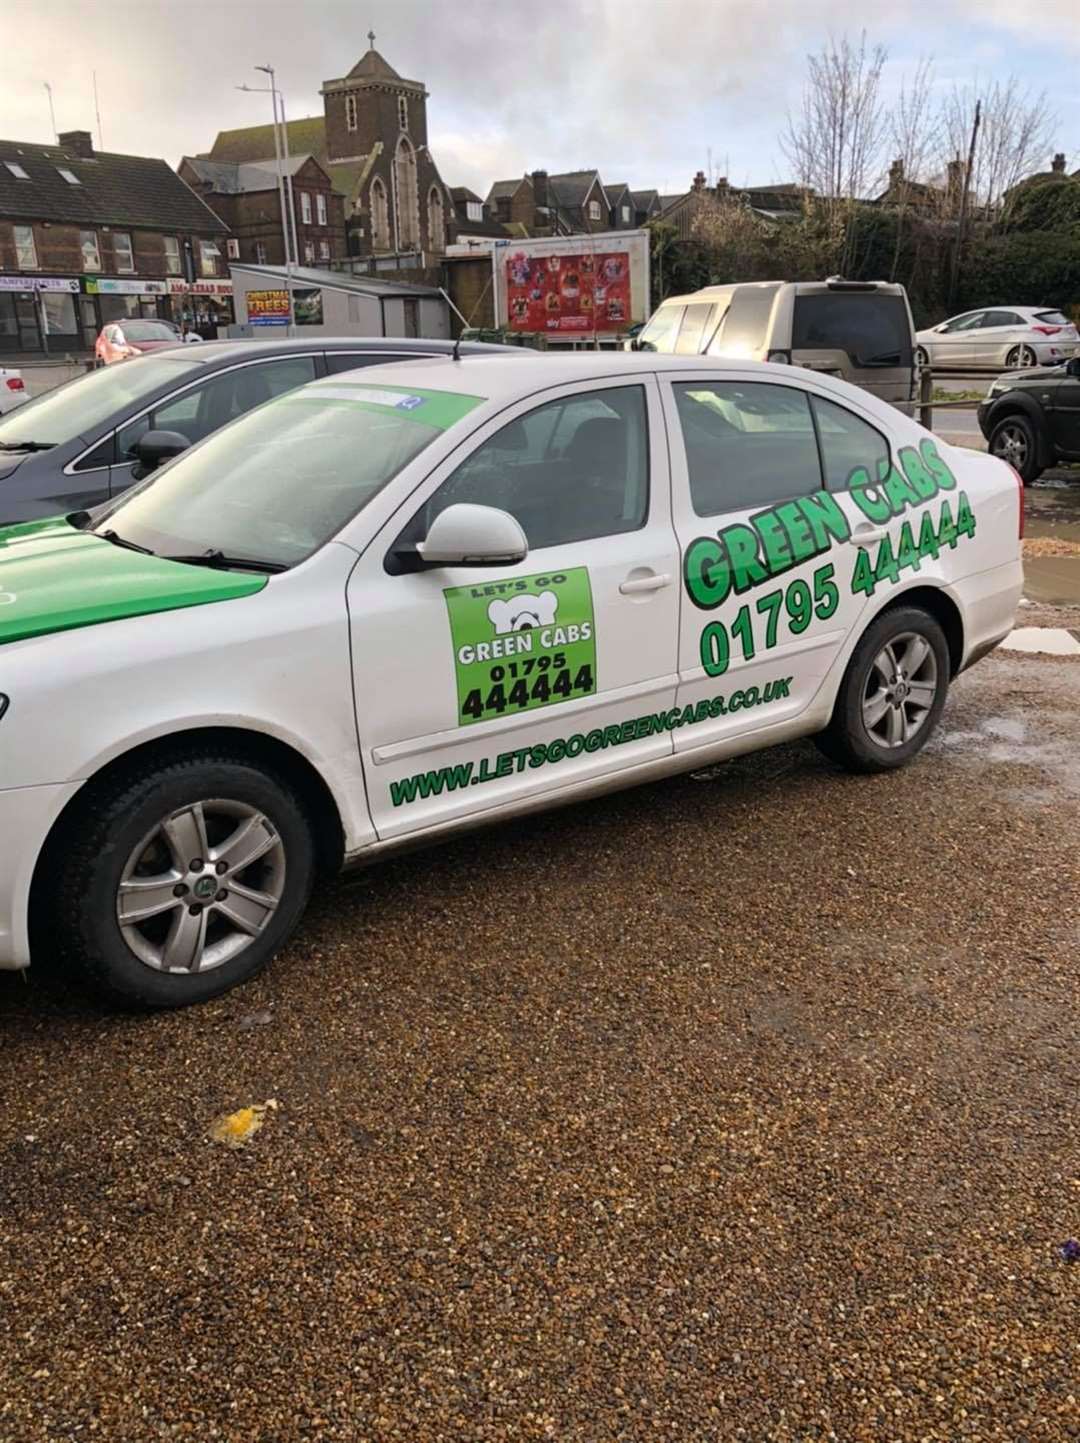 Staff at Let's Go Green Cabs in Sittingbourne have been abused by members of the public